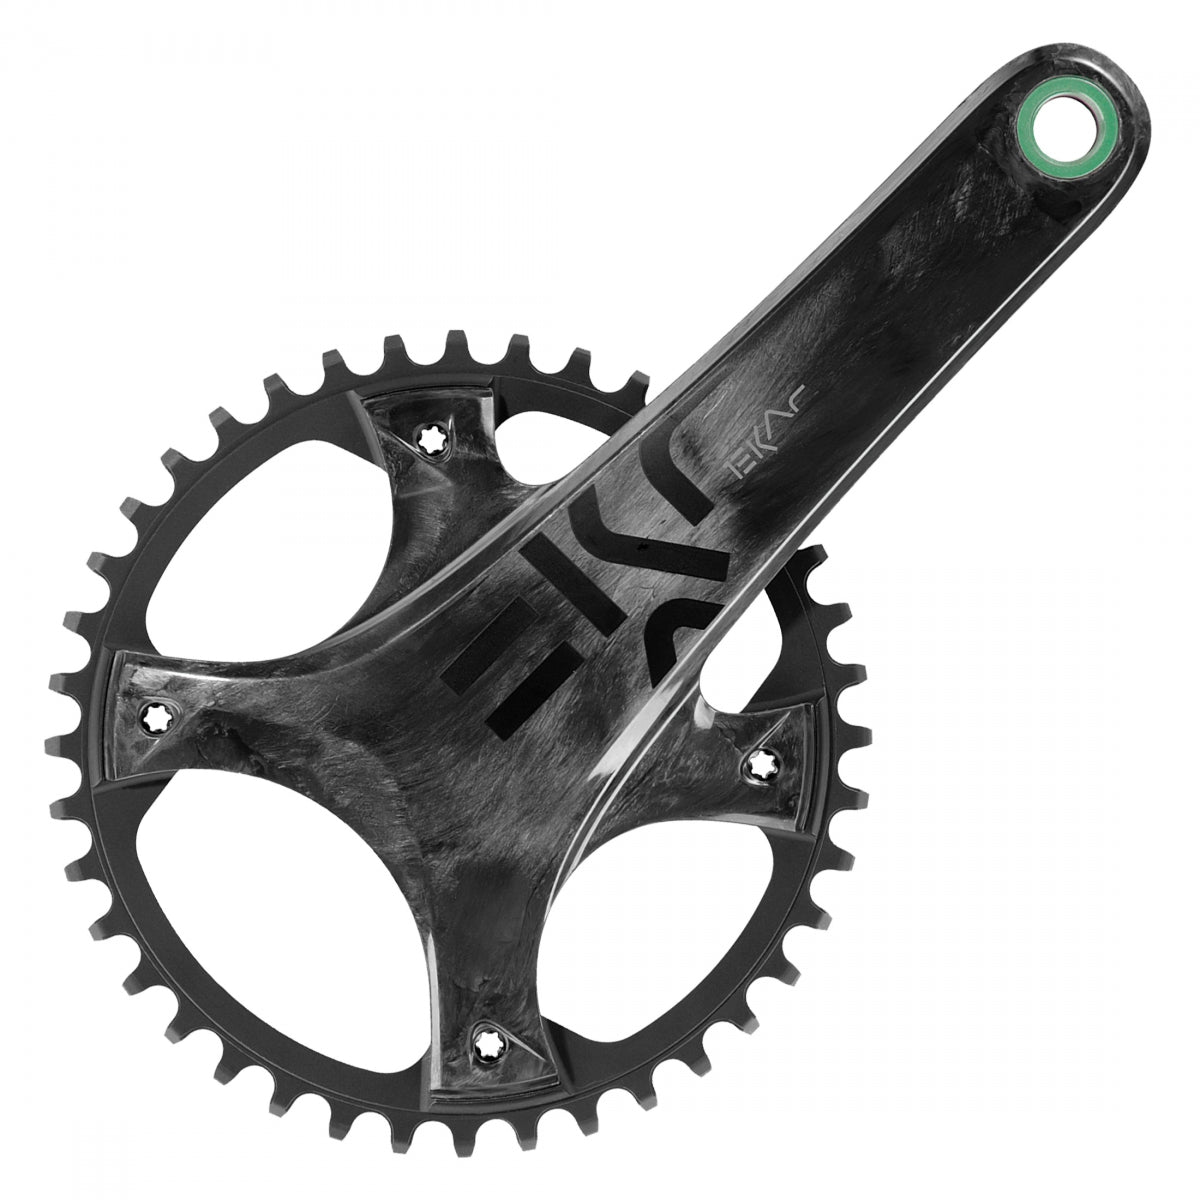 Campagnolo EKAR Crankset - 175mm, 13-Speed, 40t, 123mm BCD, Campagnolo Ultra-Torque Spindle Interface, Carbon